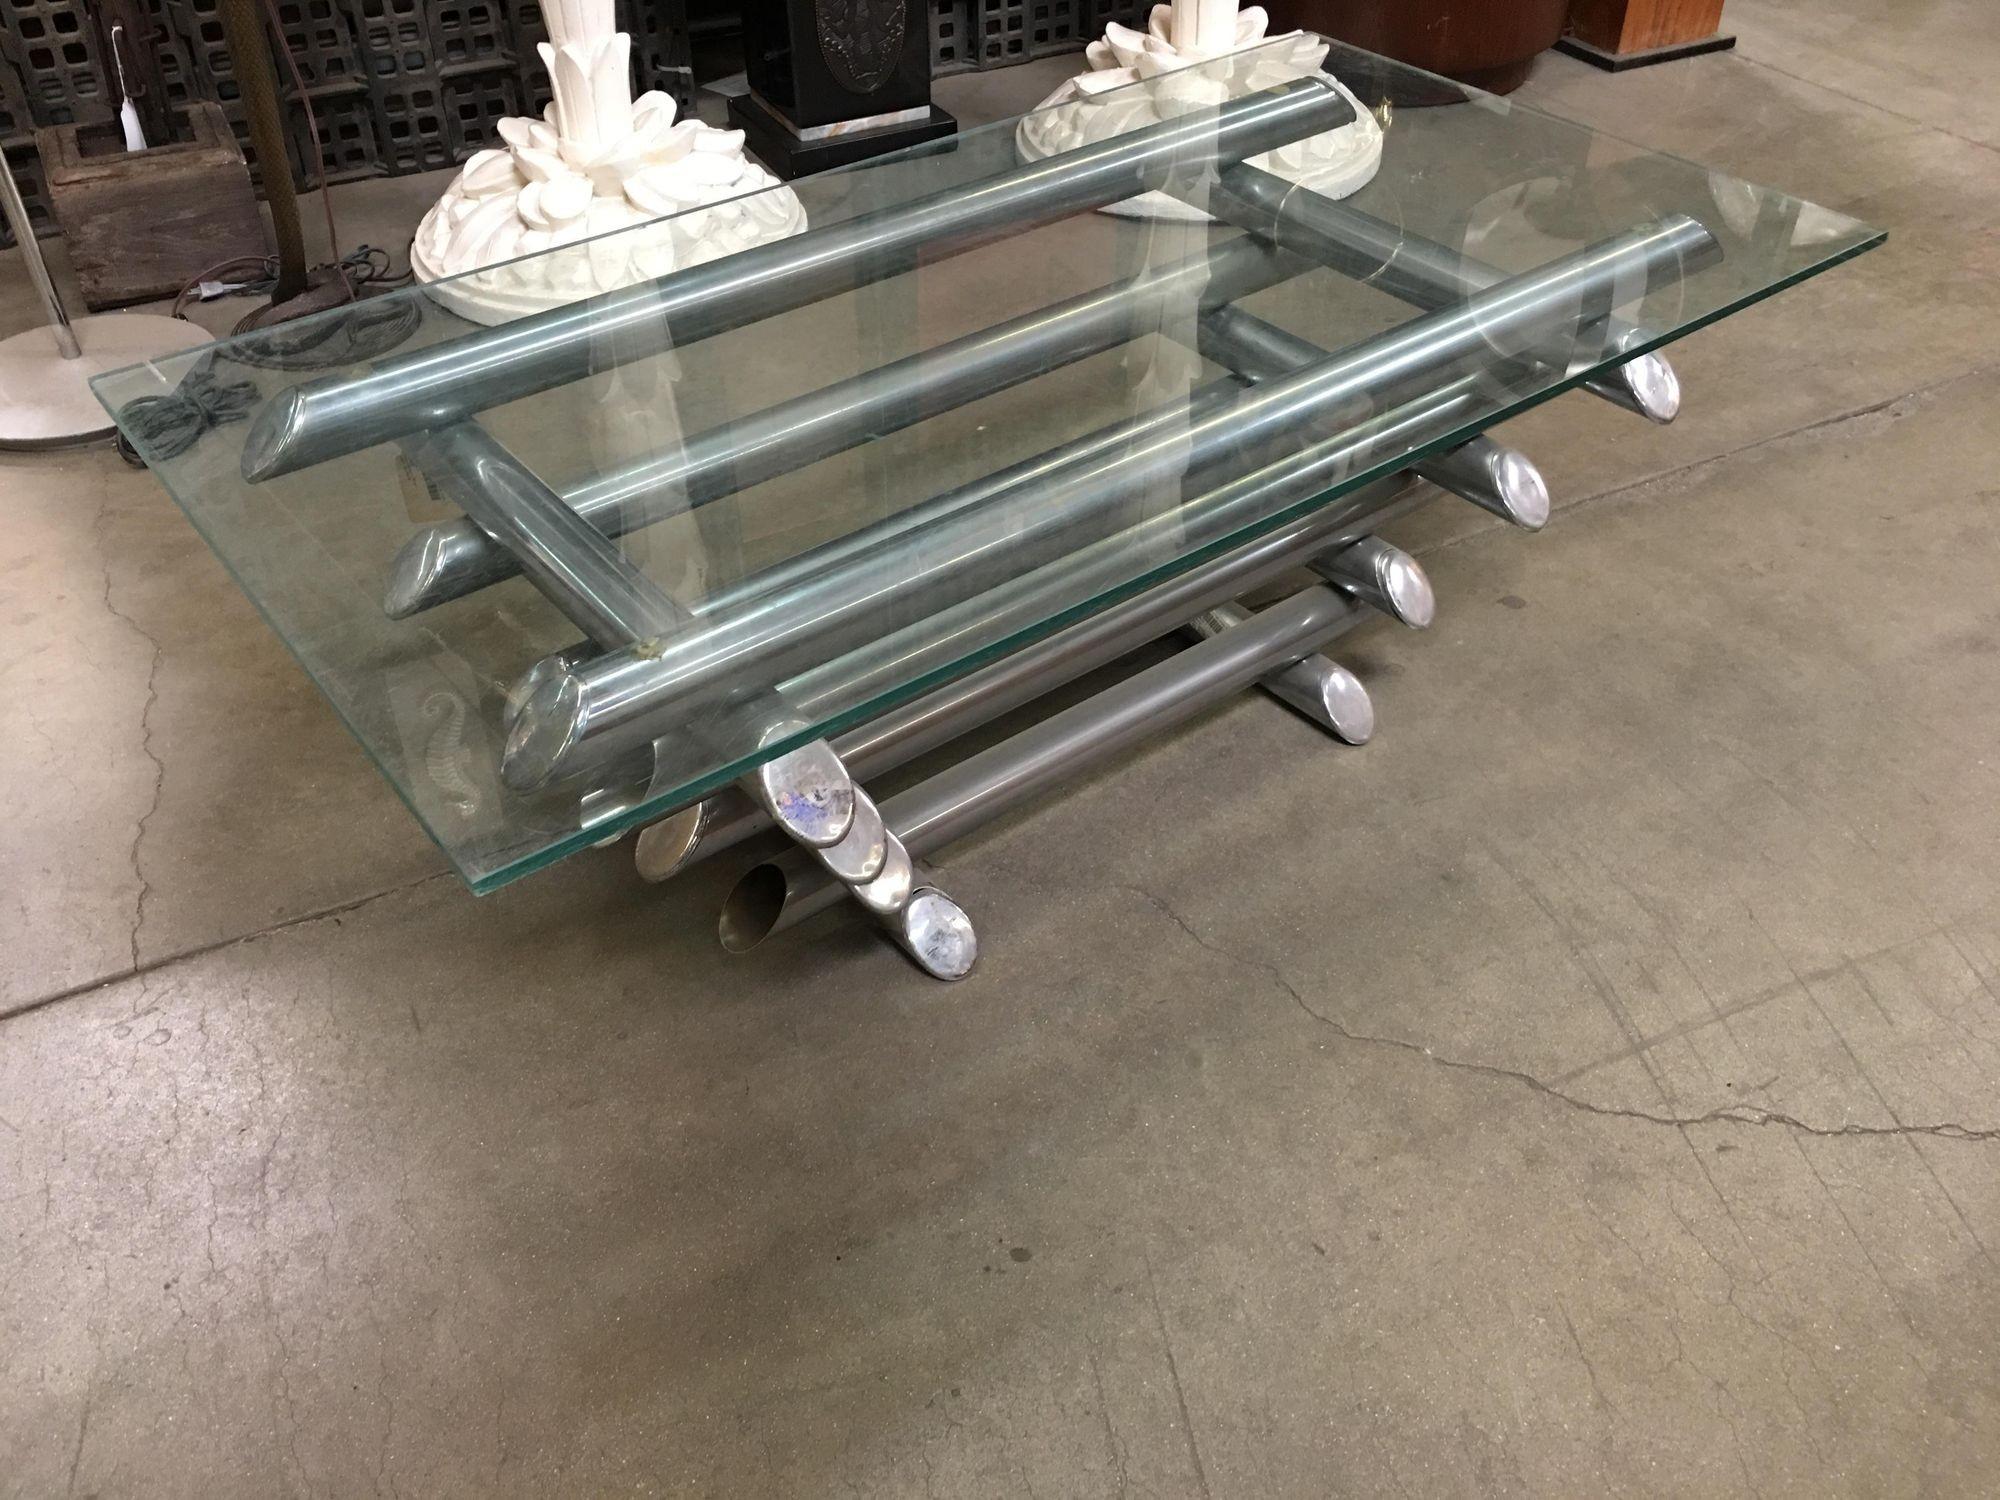 French chrome tubular steel coffee table with 8 layers of chromed metal tubes and a thick glass on top. In the style of Willy Rizzo.